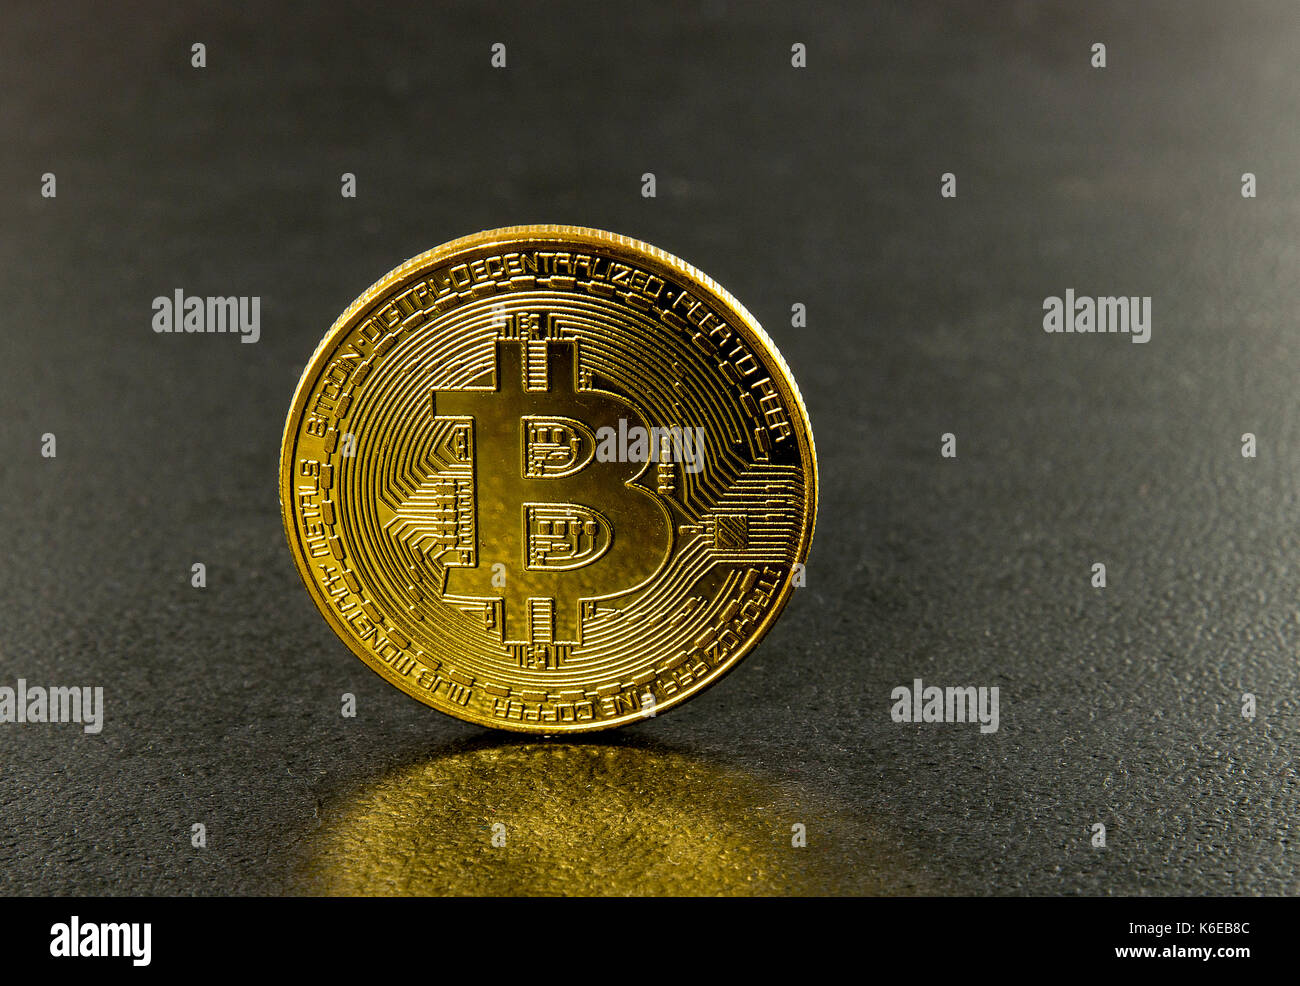 Bitcoins with black background with a single coin facing the camera in sharp focus with shading on the icon letter B on the face of the bit coin Stock Photo